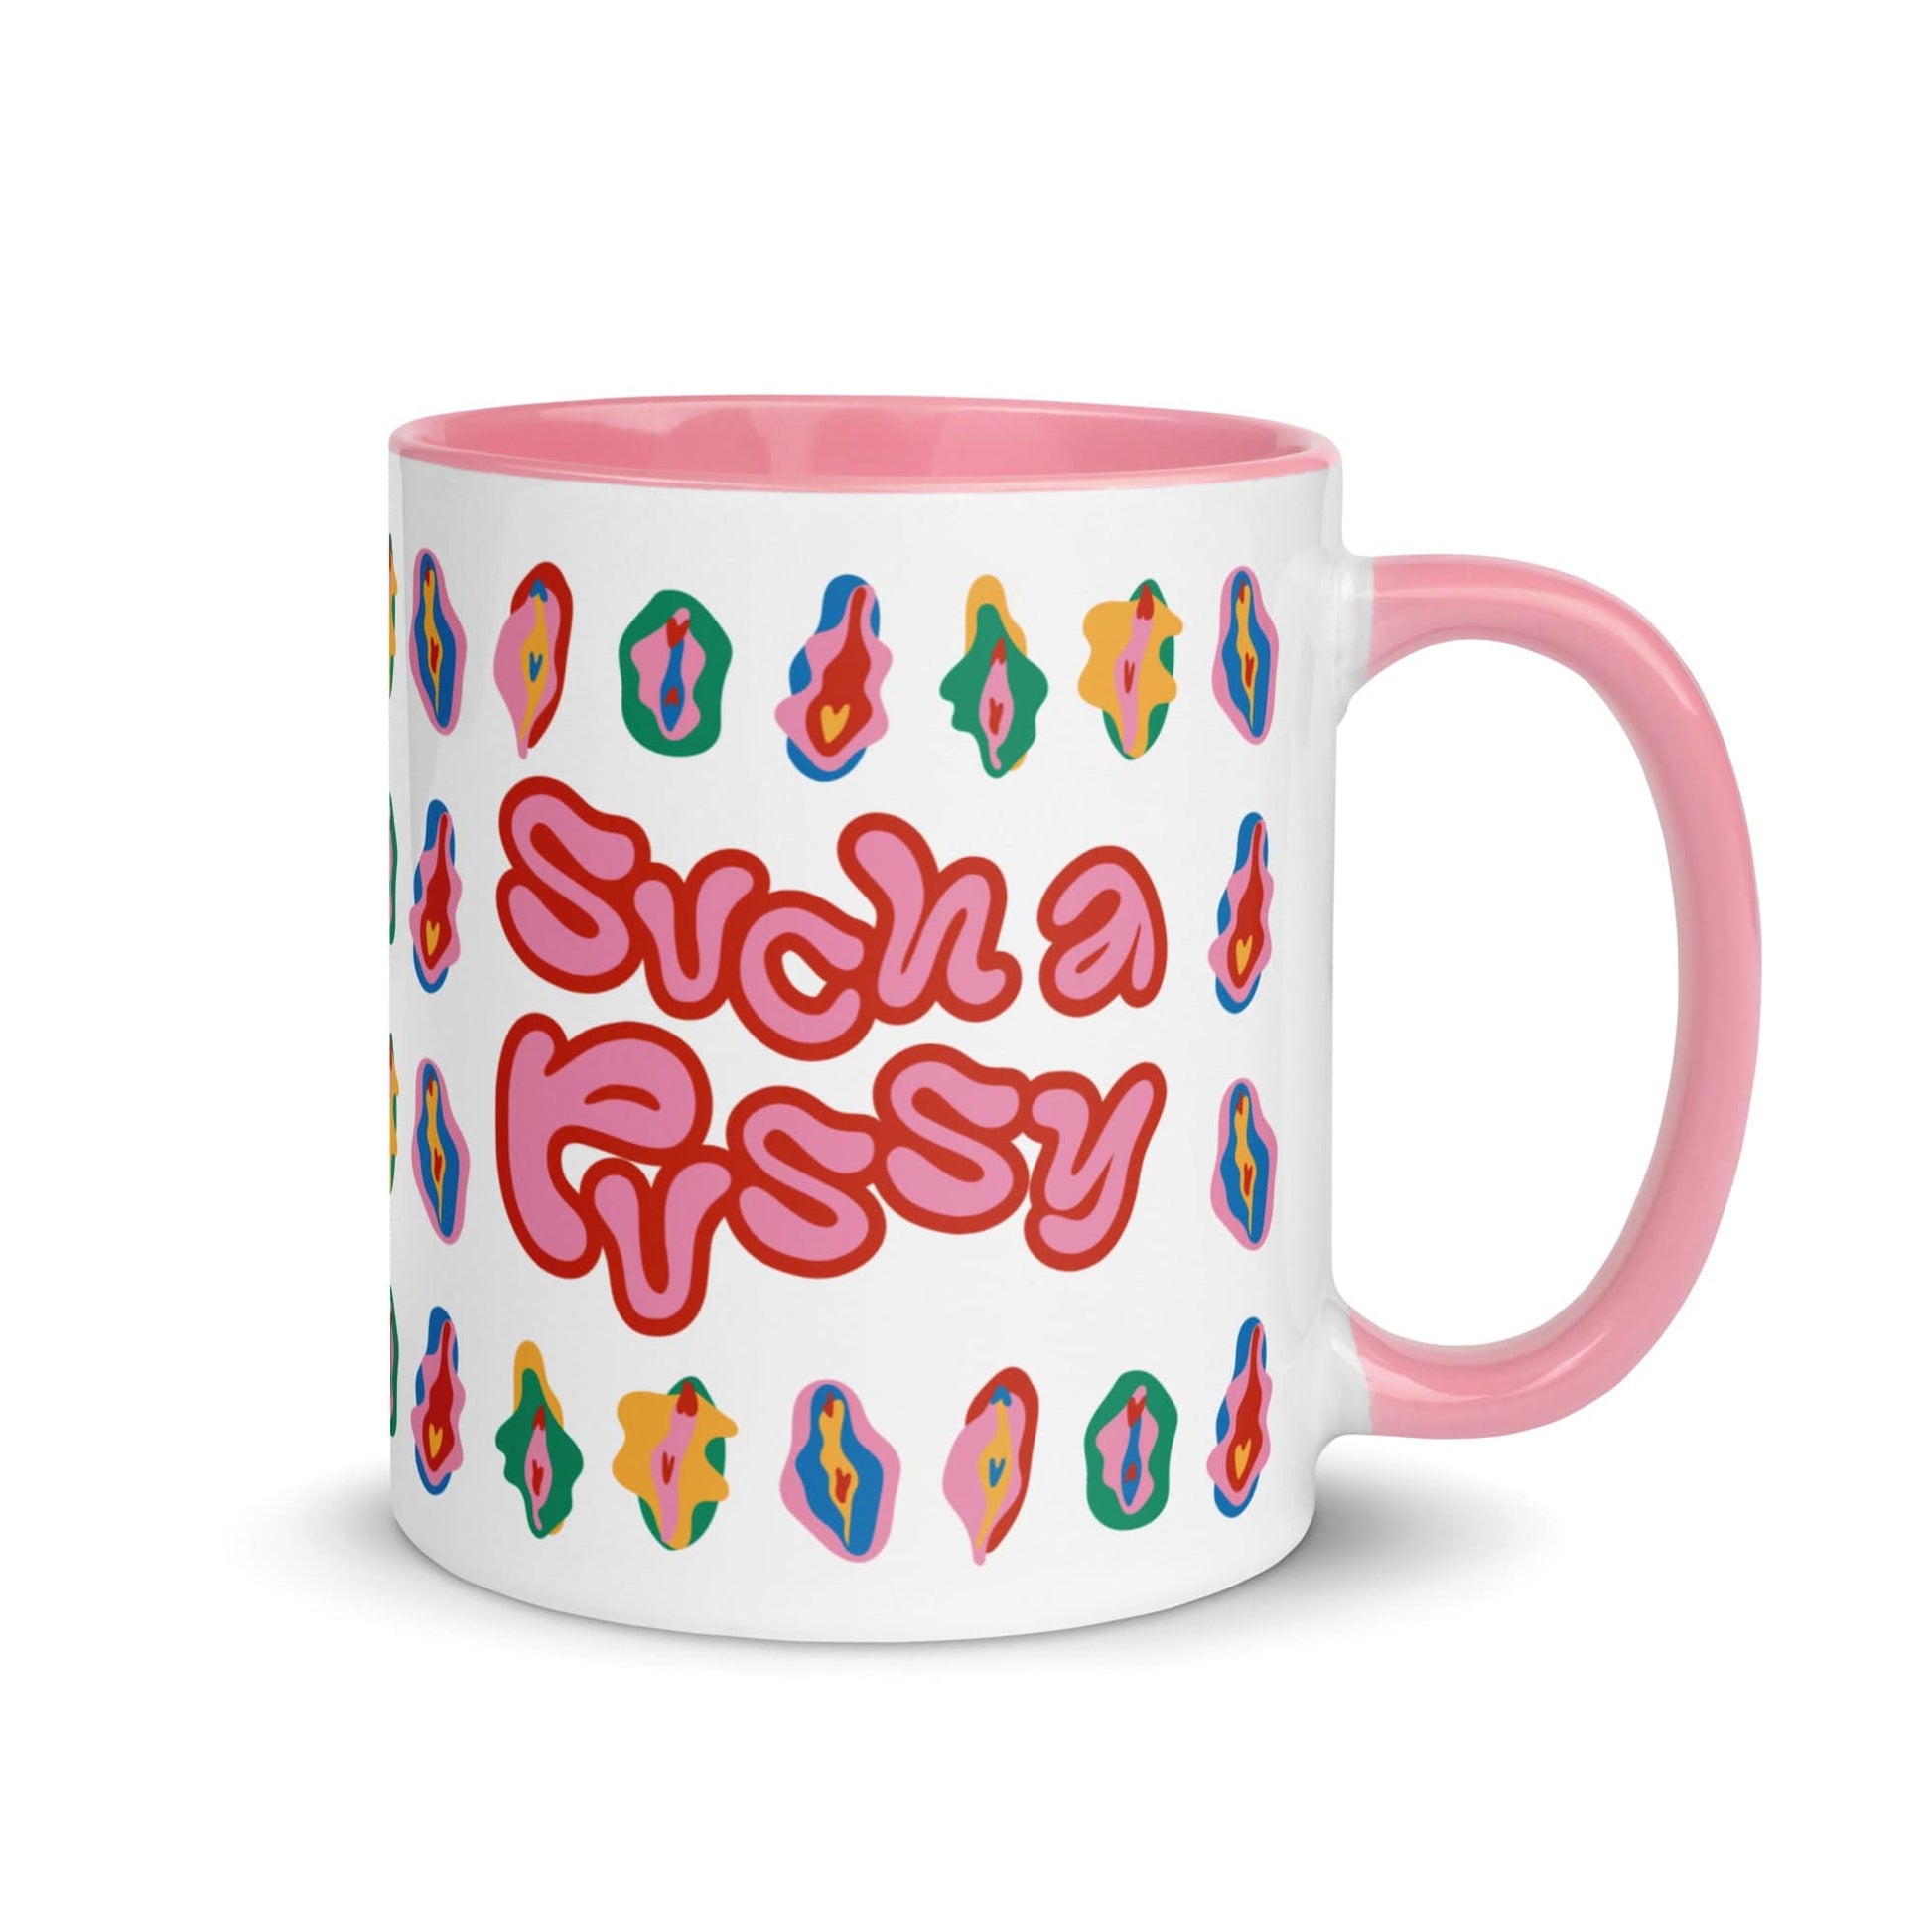 white-and-pink-such-a-pussy-feminist-ceramic-mug-by-feminist-define-back